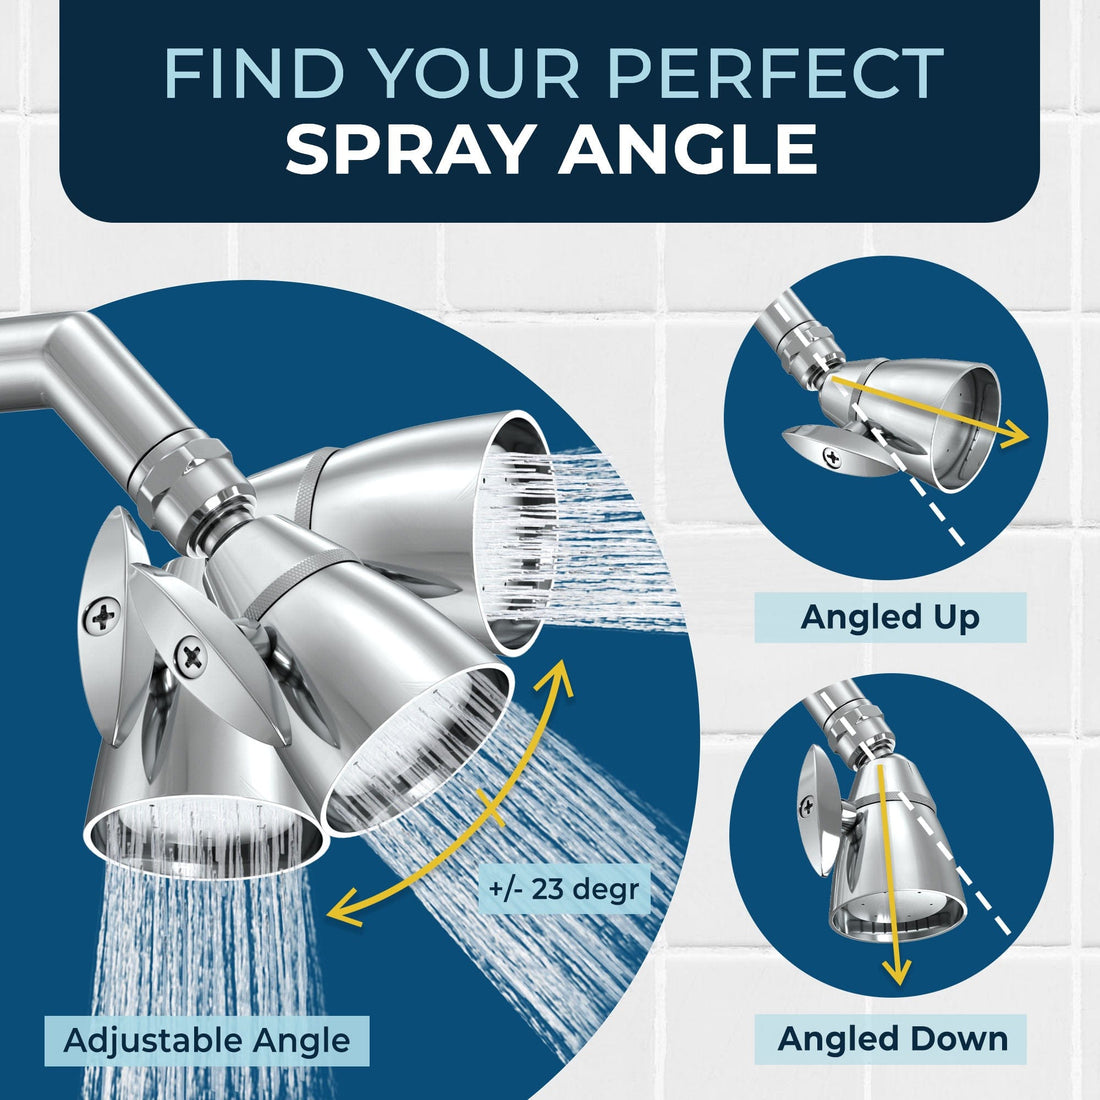 Spray Angle Fixed Small Shower Head Adjusts Angle Up to 23 Degrees Chrome / 2.5 - The Shower Head Store